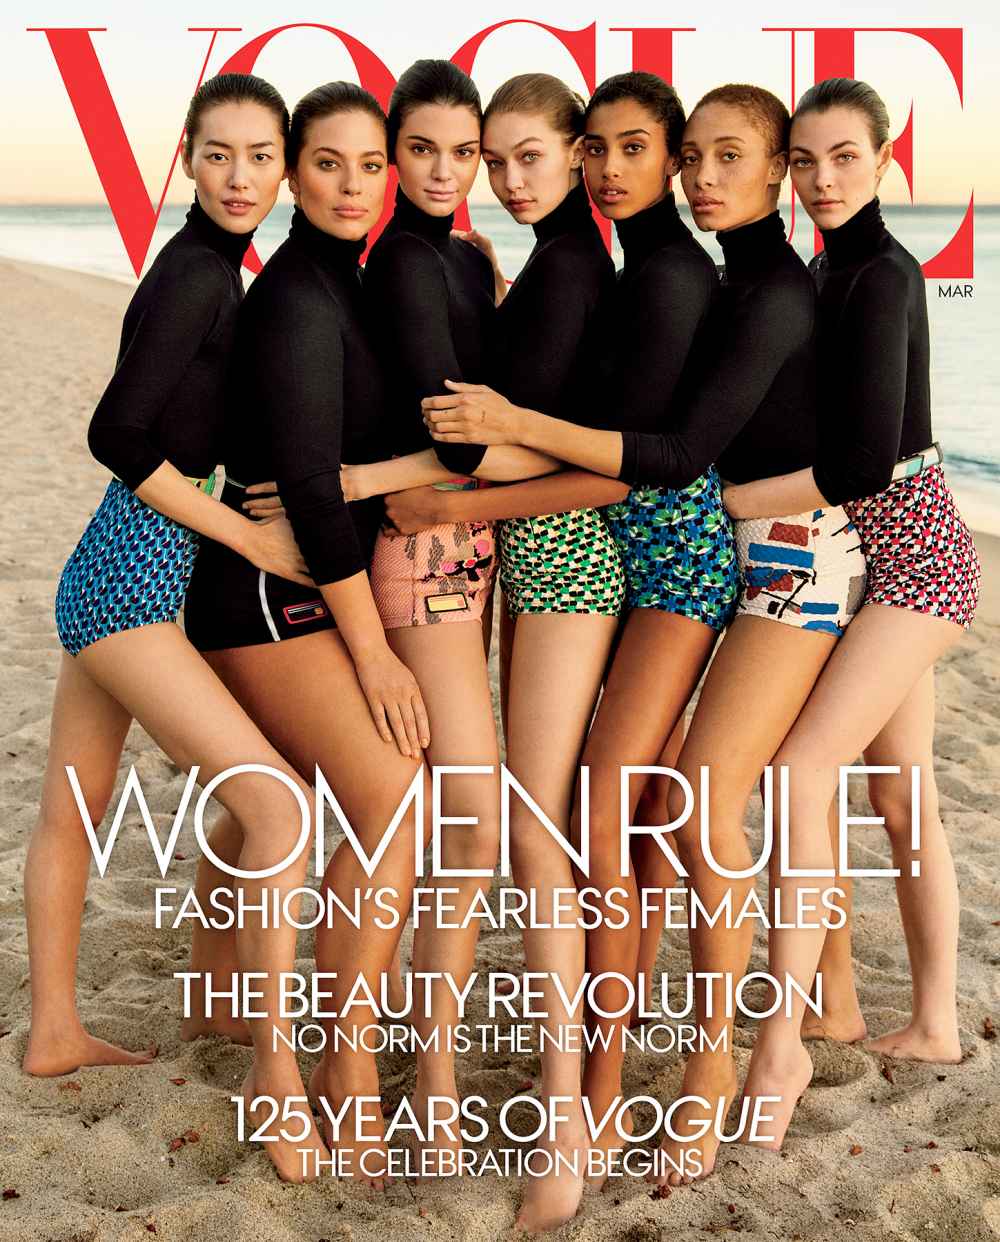 March 2017 Vogue cover